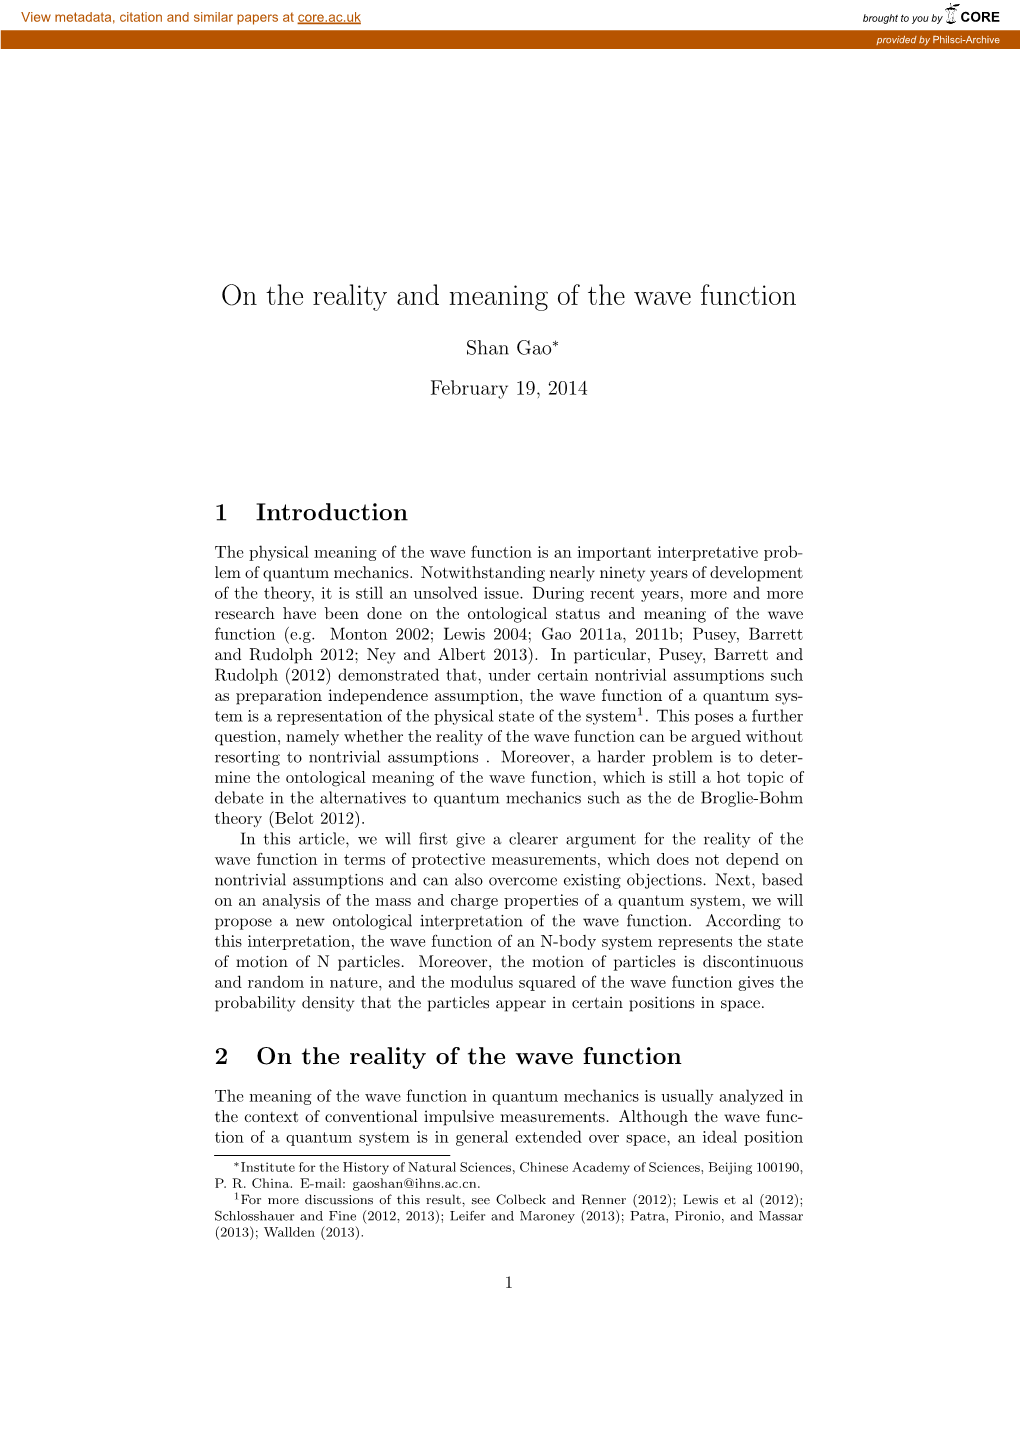 On the Reality and Meaning of the Wave Function